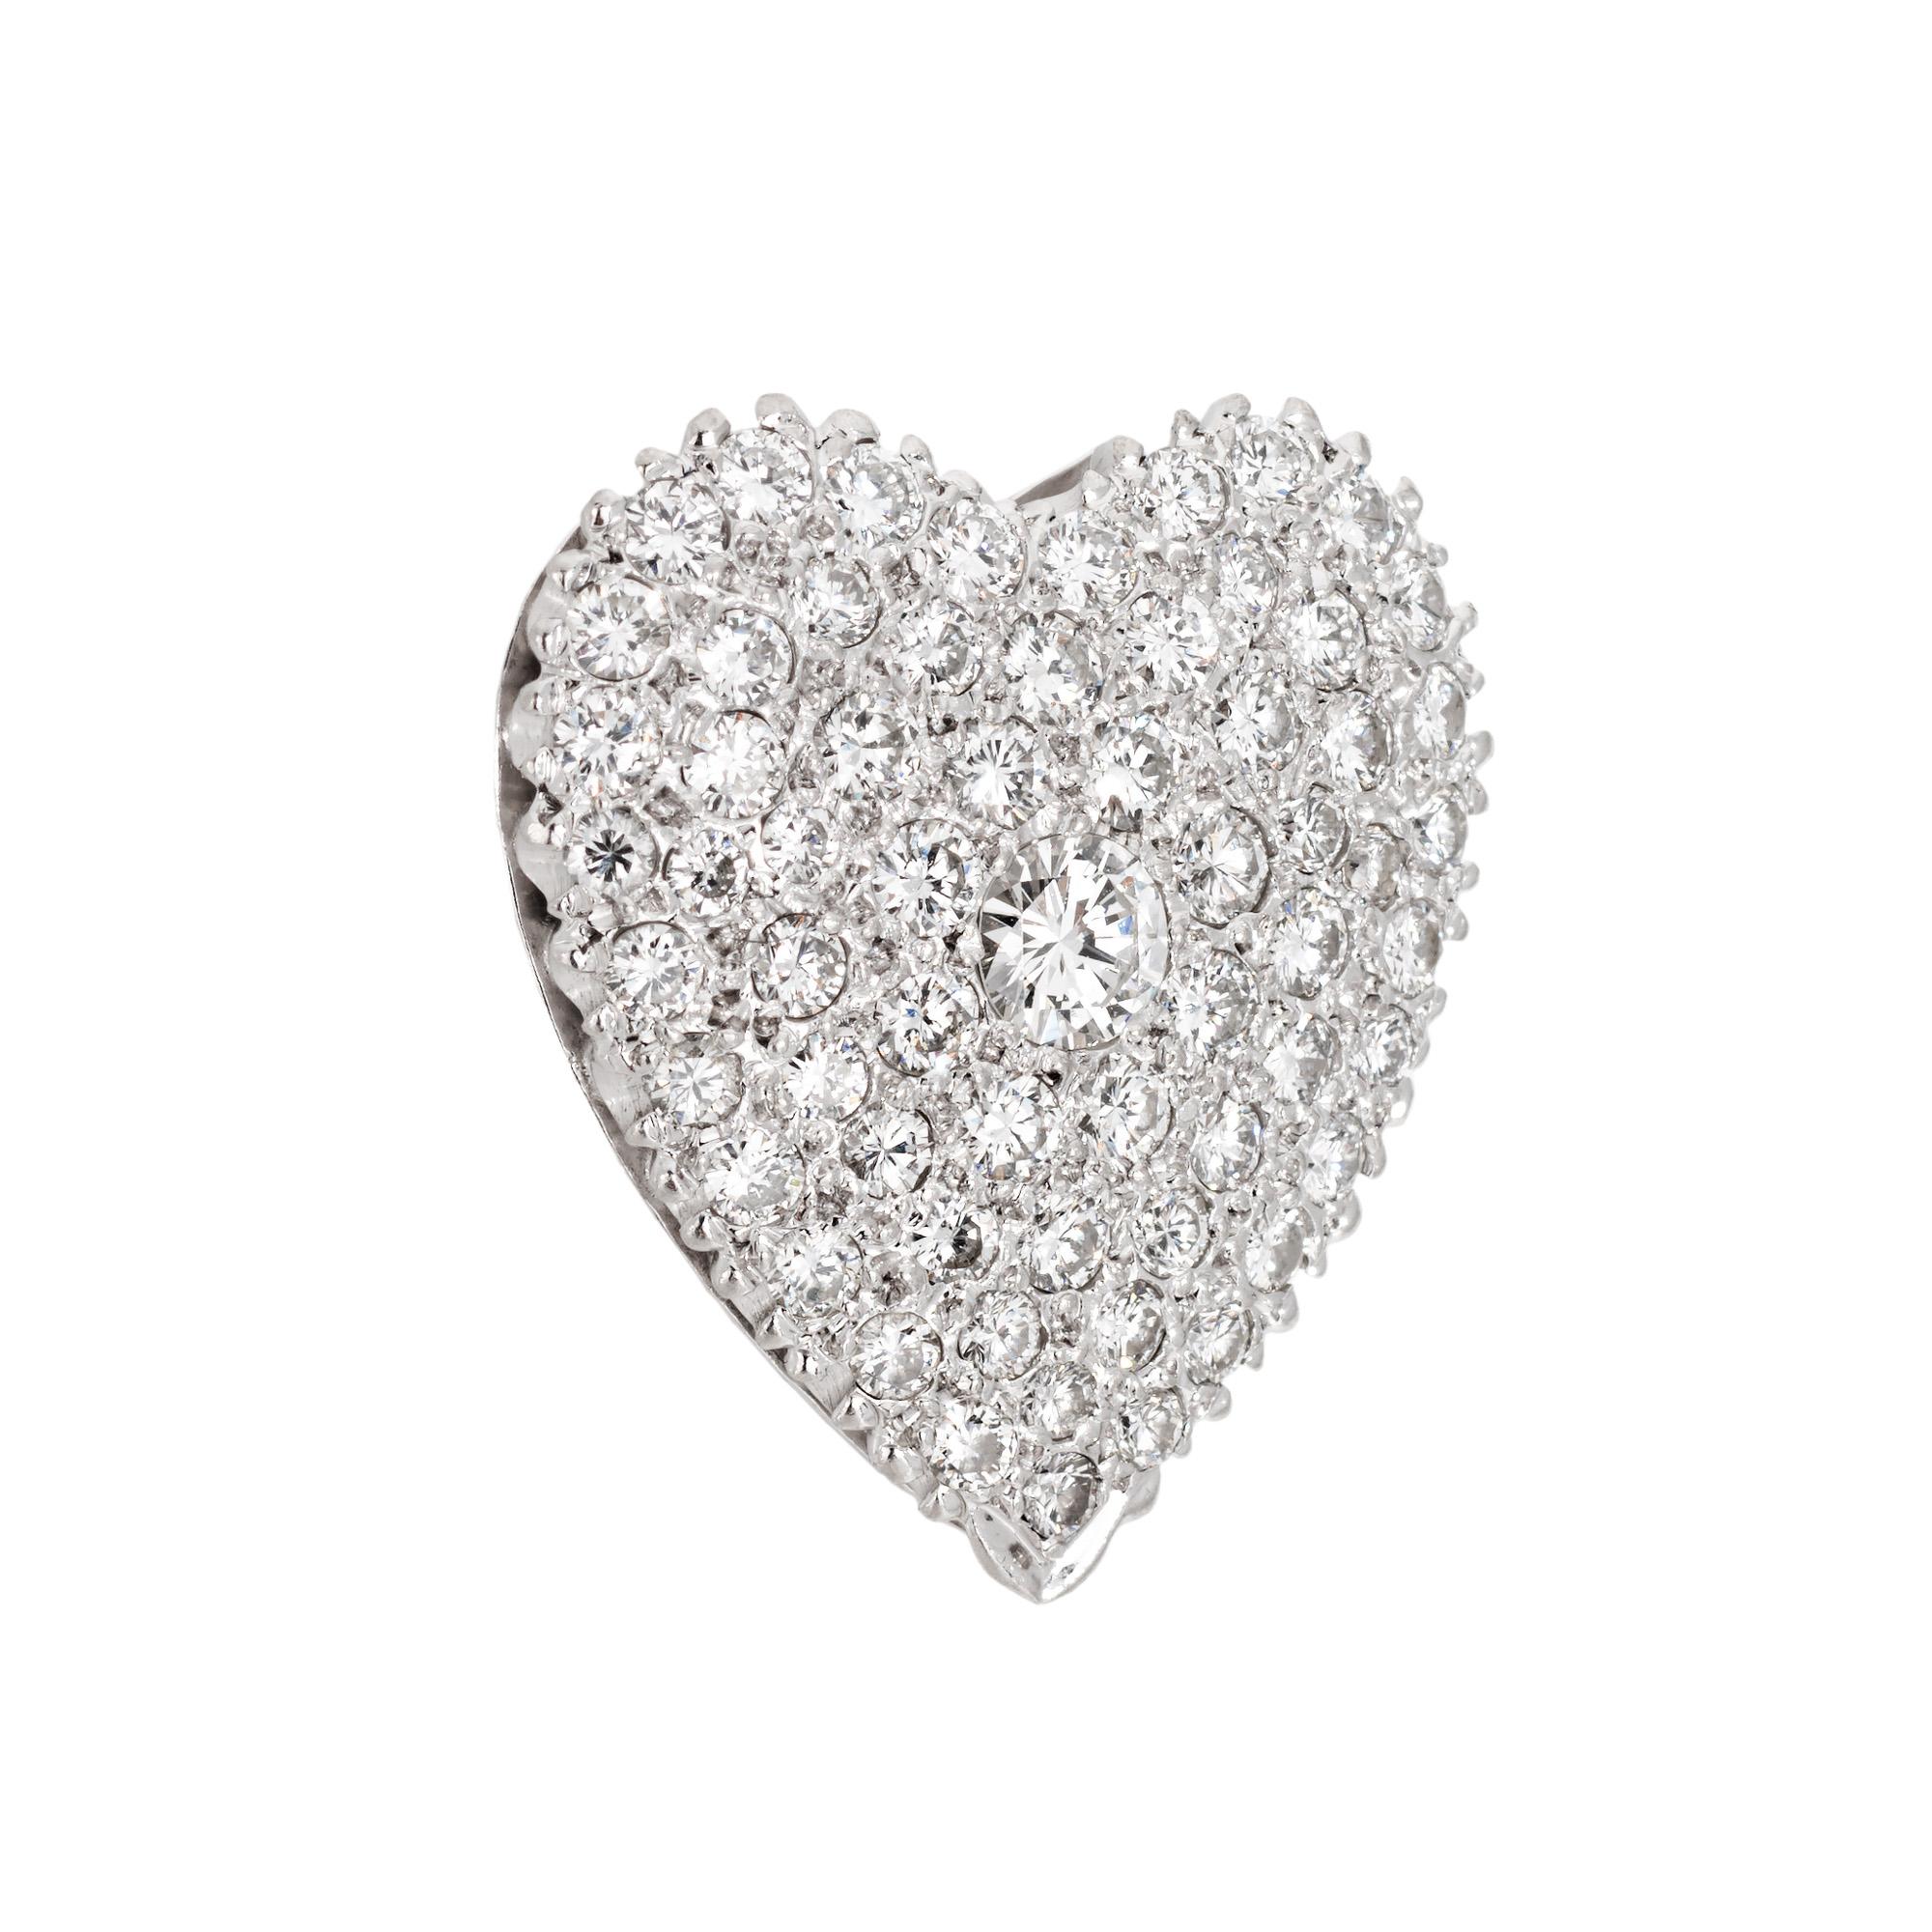 Finely detailed vintage diamond heart pendant crafted in 900 platinum (circa 1950s to 1960s).  

Round brilliant cut diamonds total an estimated 2 carats (estimated at G-H color and VS2-SI1 clarity).  

The charming heart pendant is set with bright